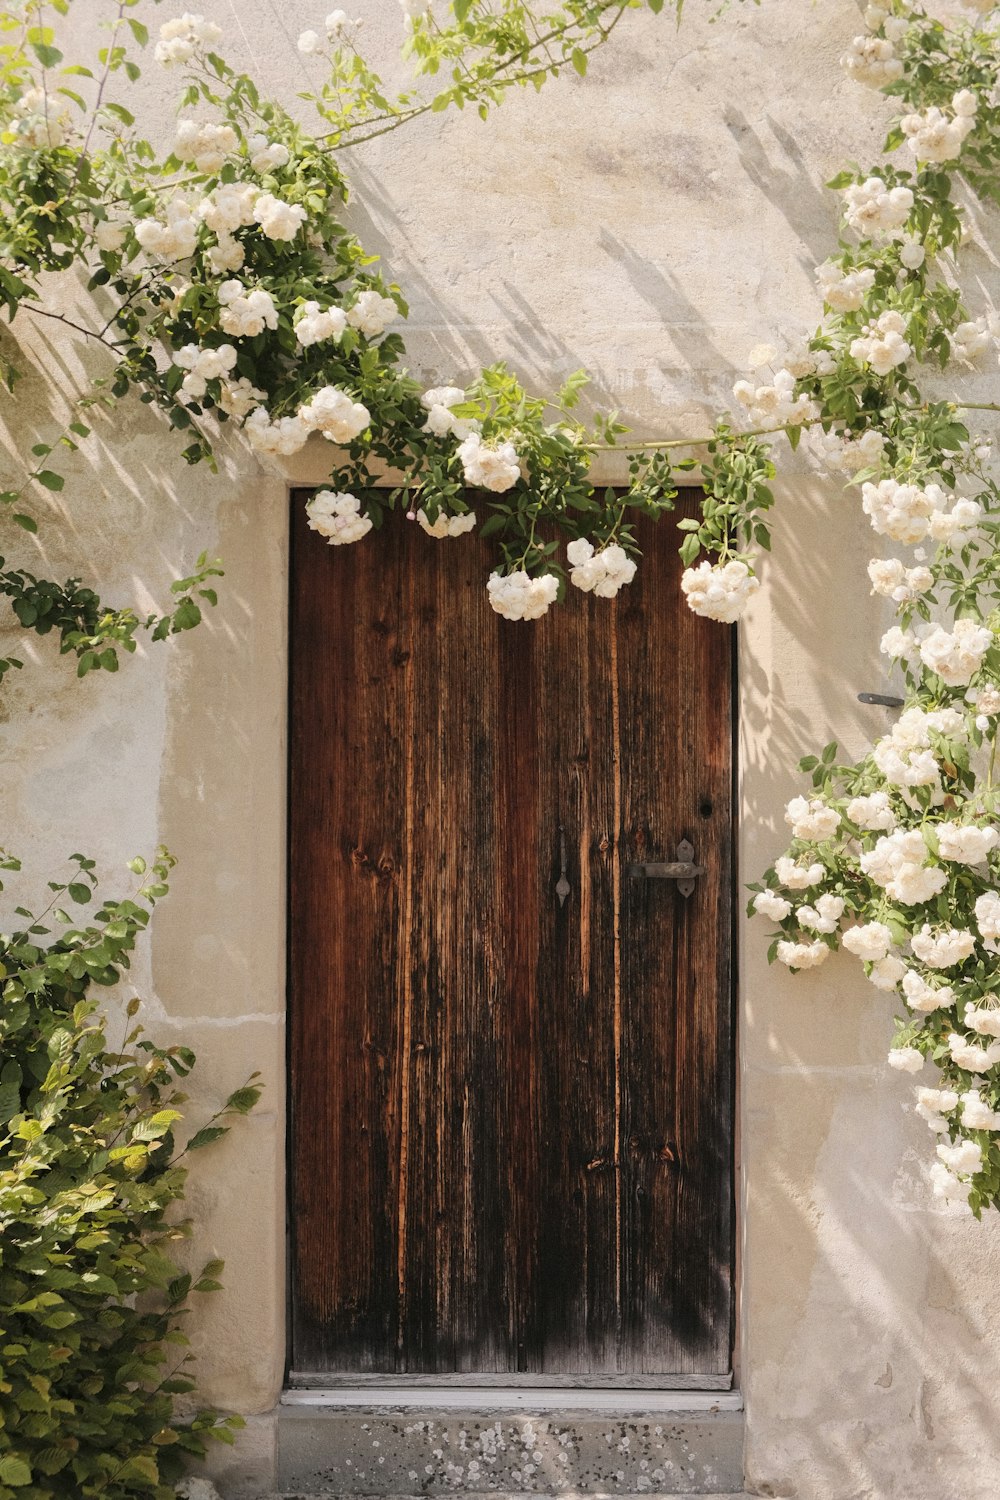 a wooden door surrounded by white flowers and greenery